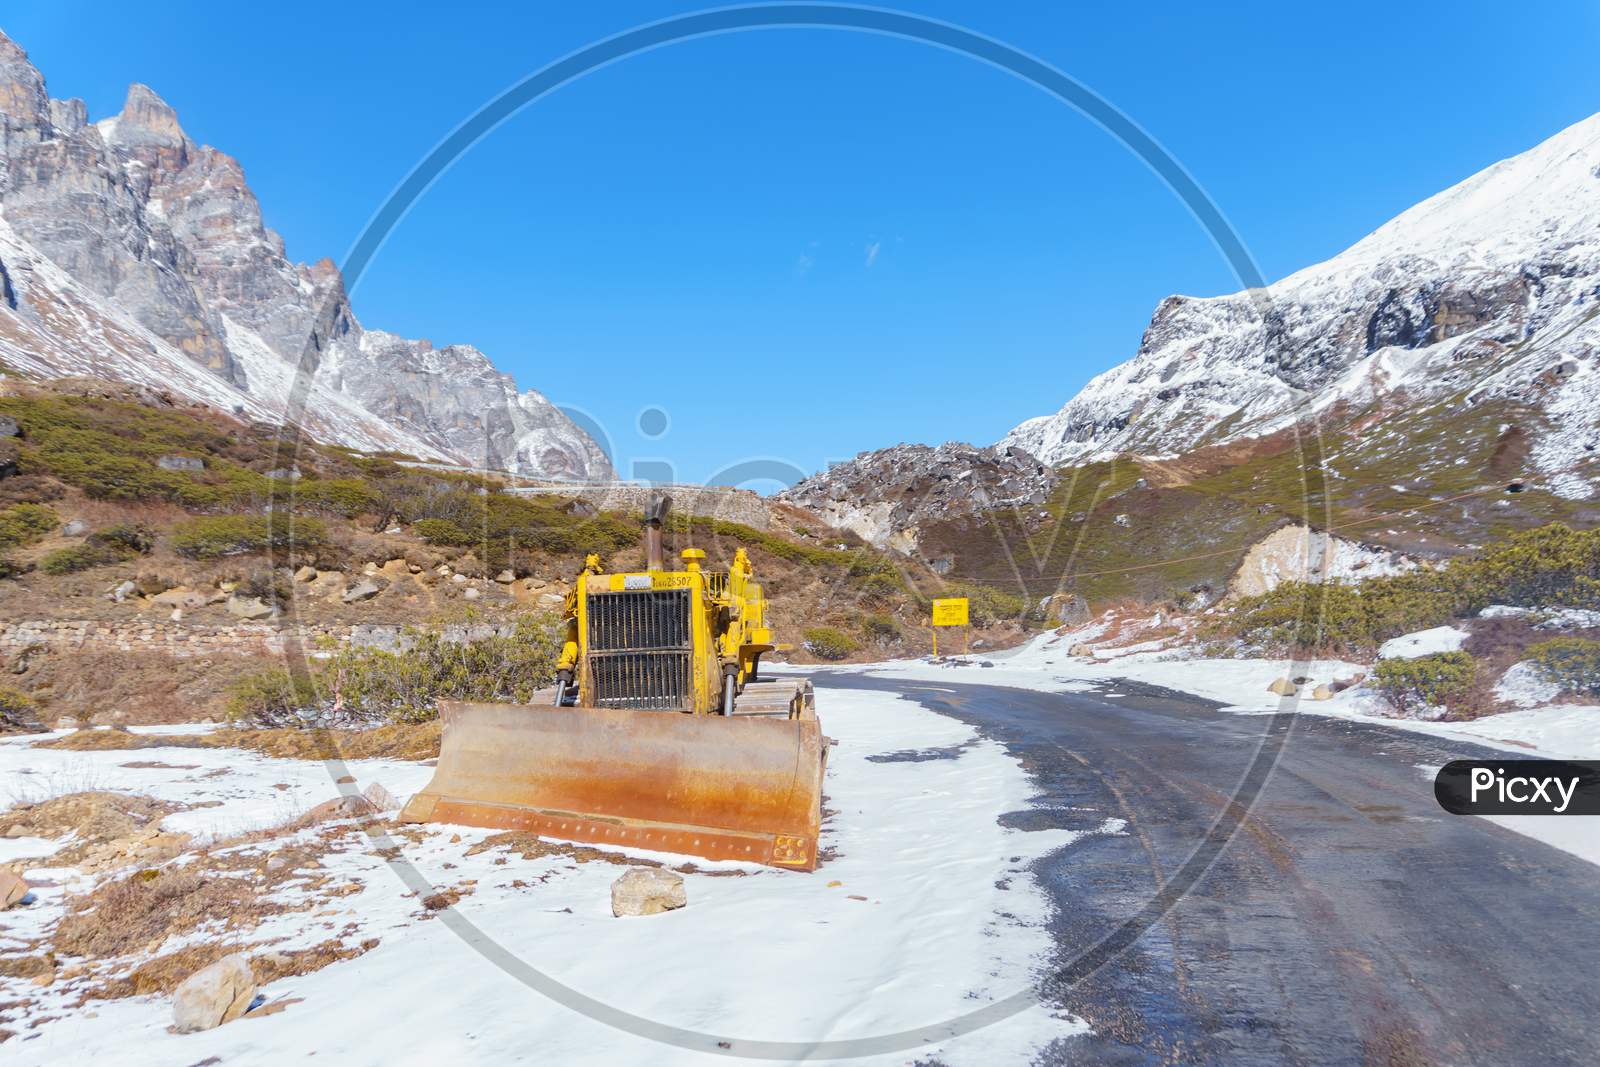 a yellow bulldozer waiting for landslides and heavy snow on the mountain road